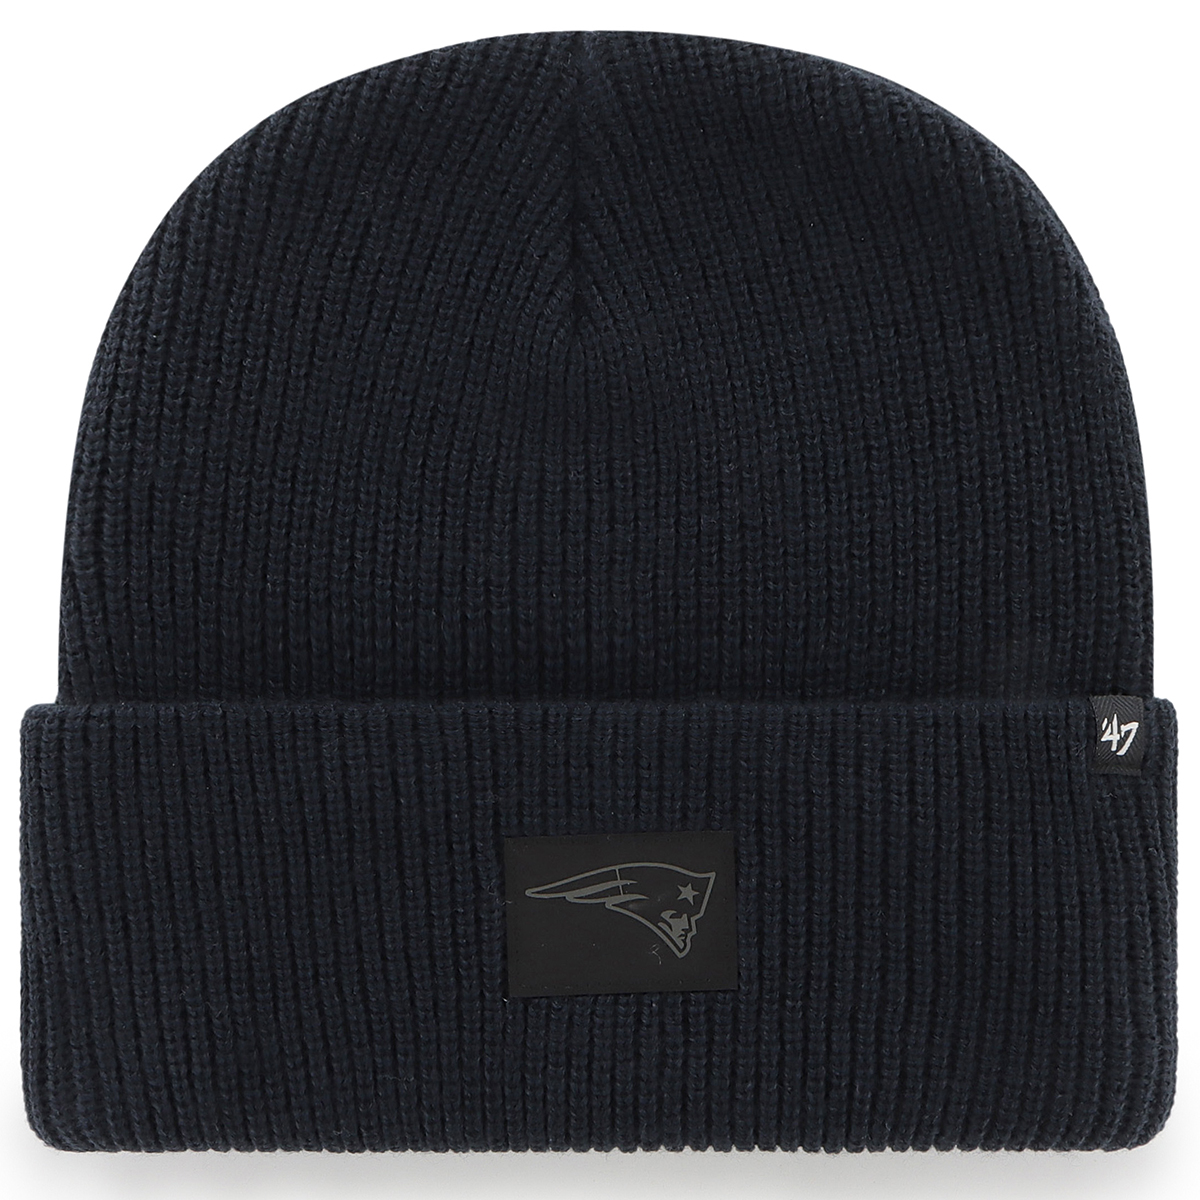 New England Patriots Men's '47 Compact Cuff Knit Hat